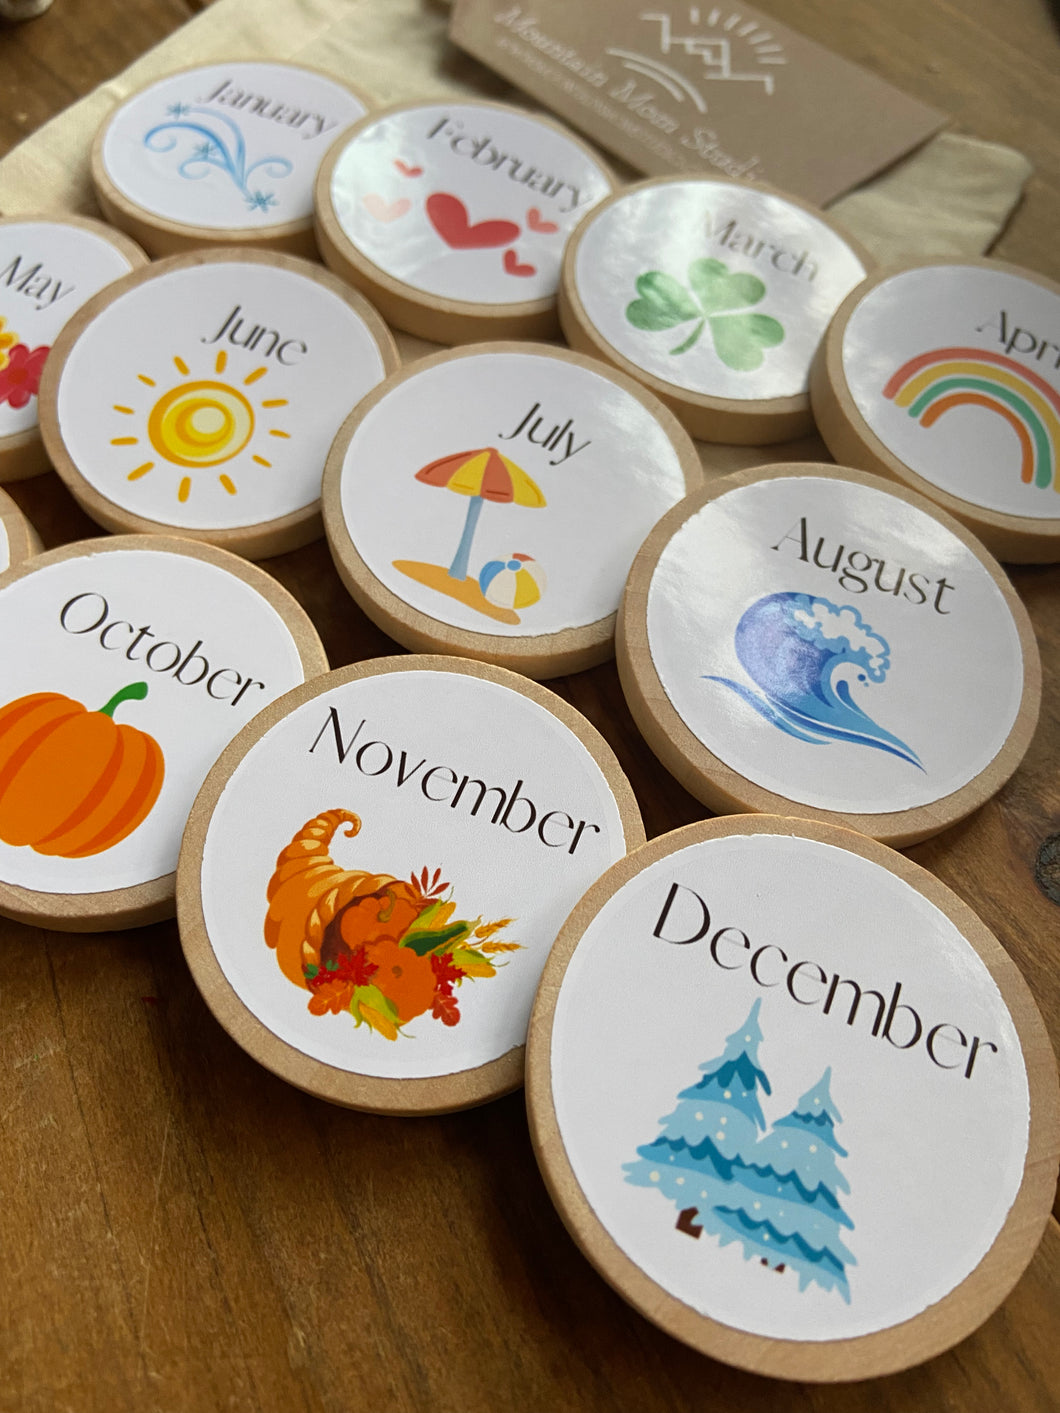 Months of the Year Wooden Learning Tiles and Magnets - Set of 12 - Preschool Education - Montessori, Charlotte Mason, Option for Memory Game